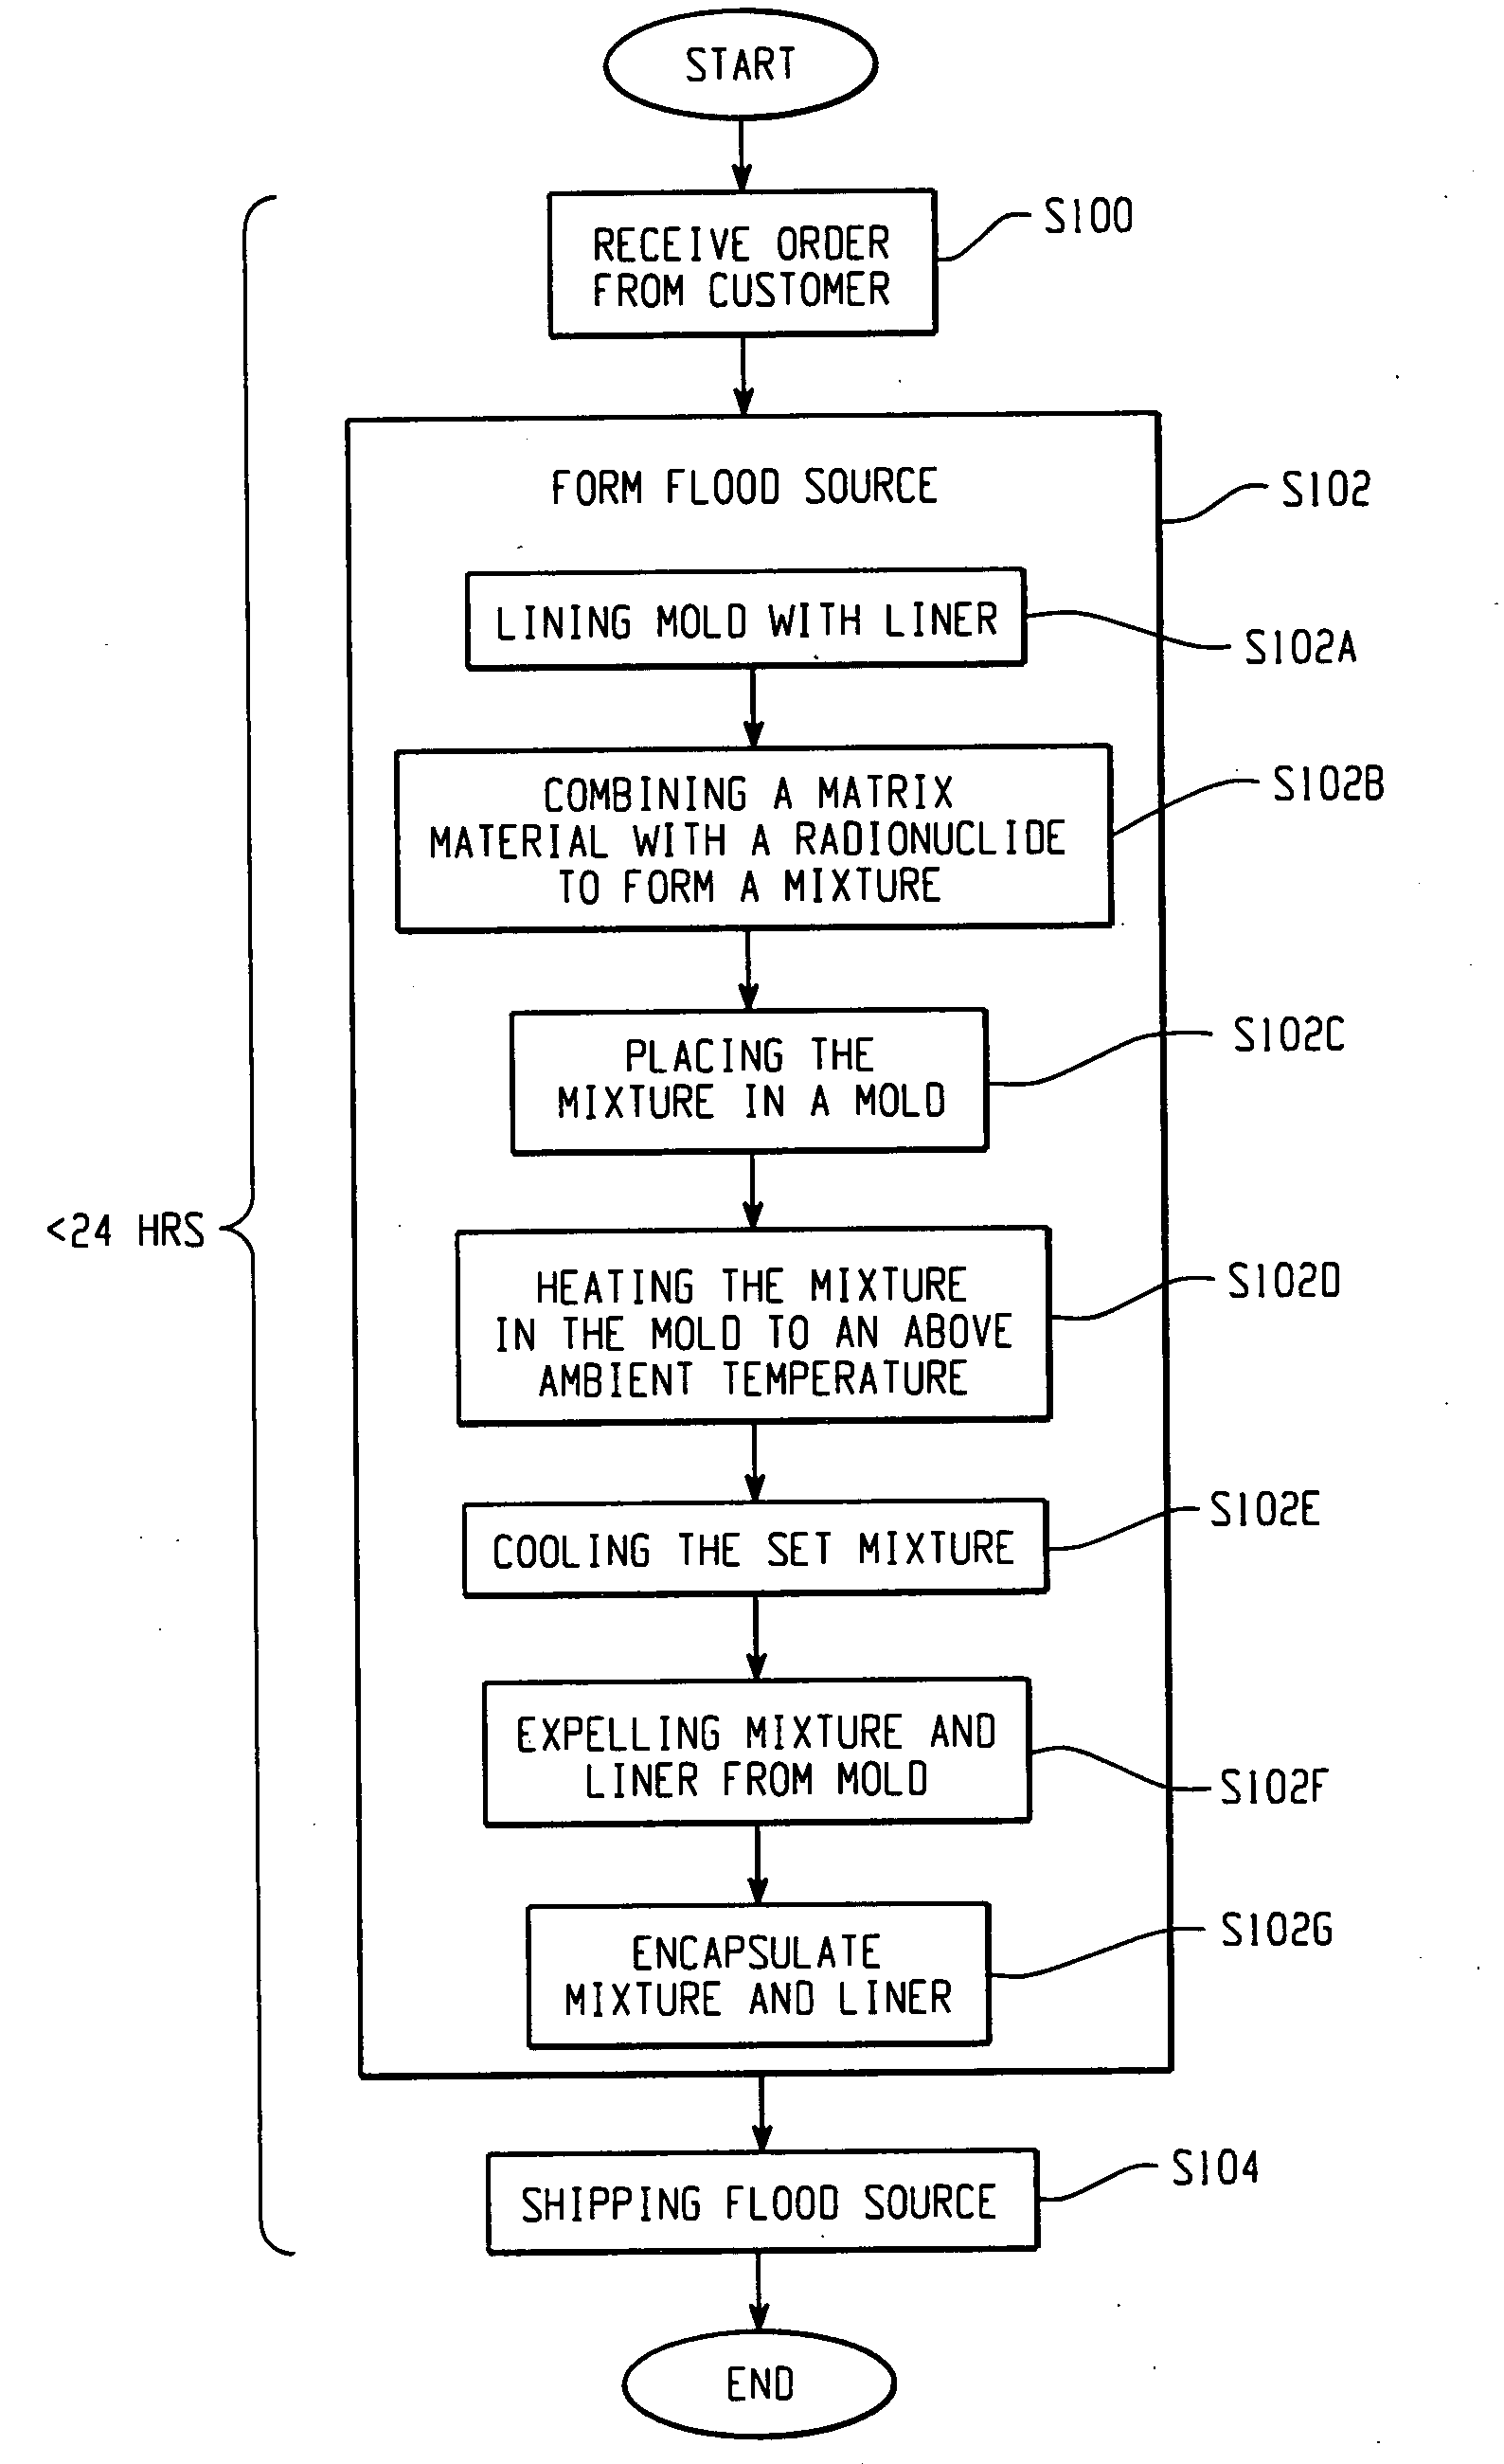 Method for manufacturing a solid uniform flood source for quality control of gamma imaging cameras